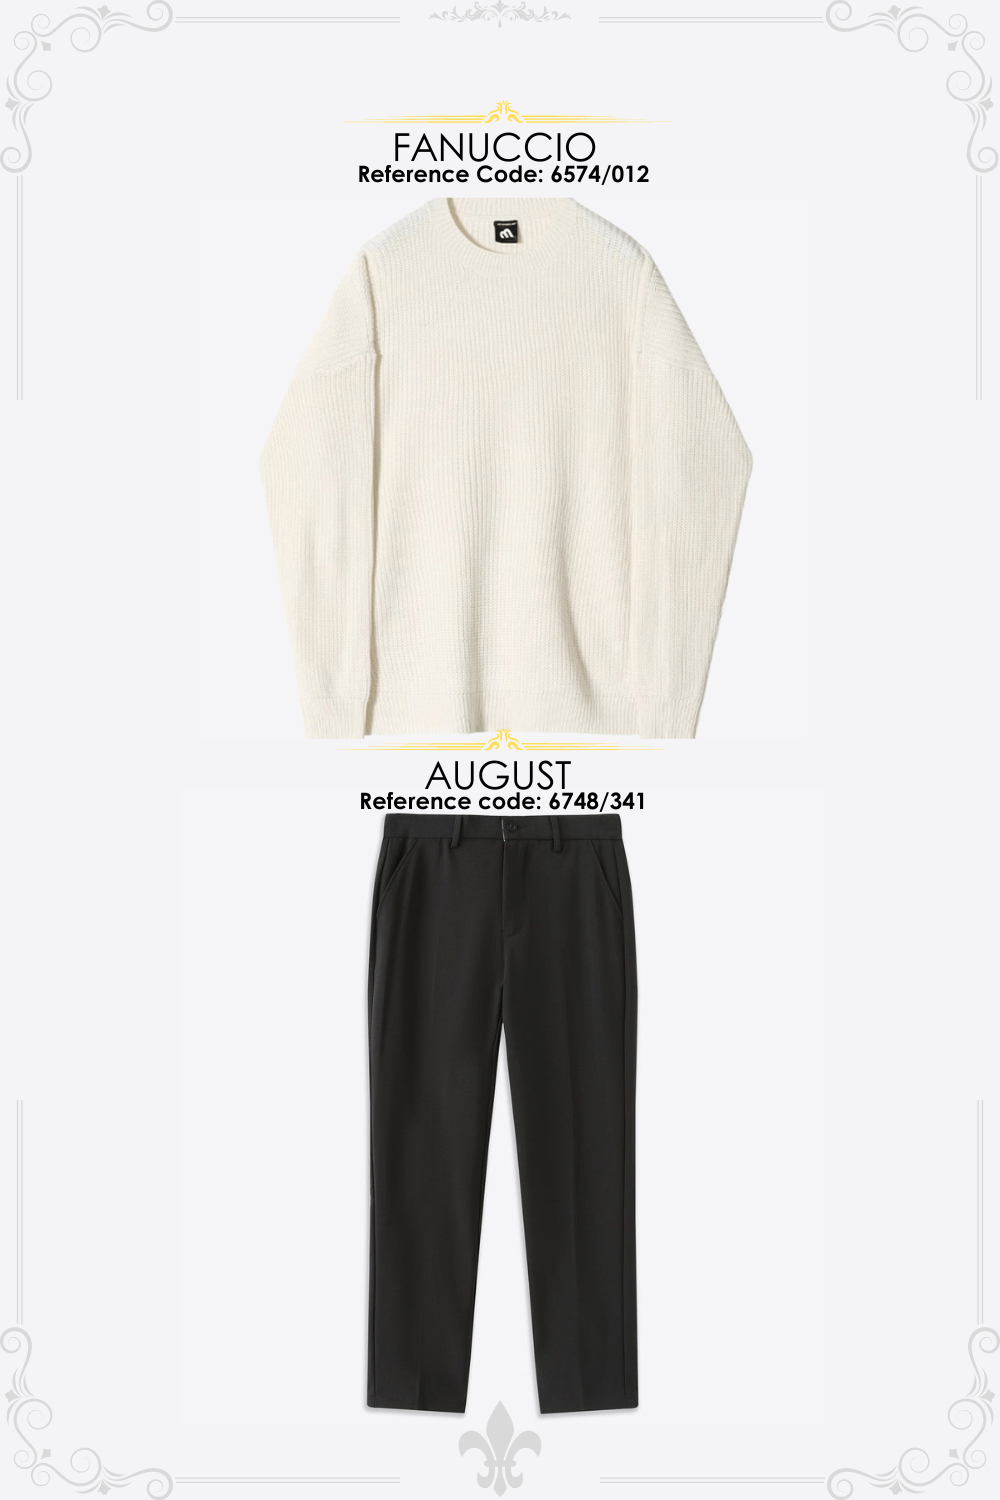 Old Money Outfit n°1 : FANUCCIO X AUGUST